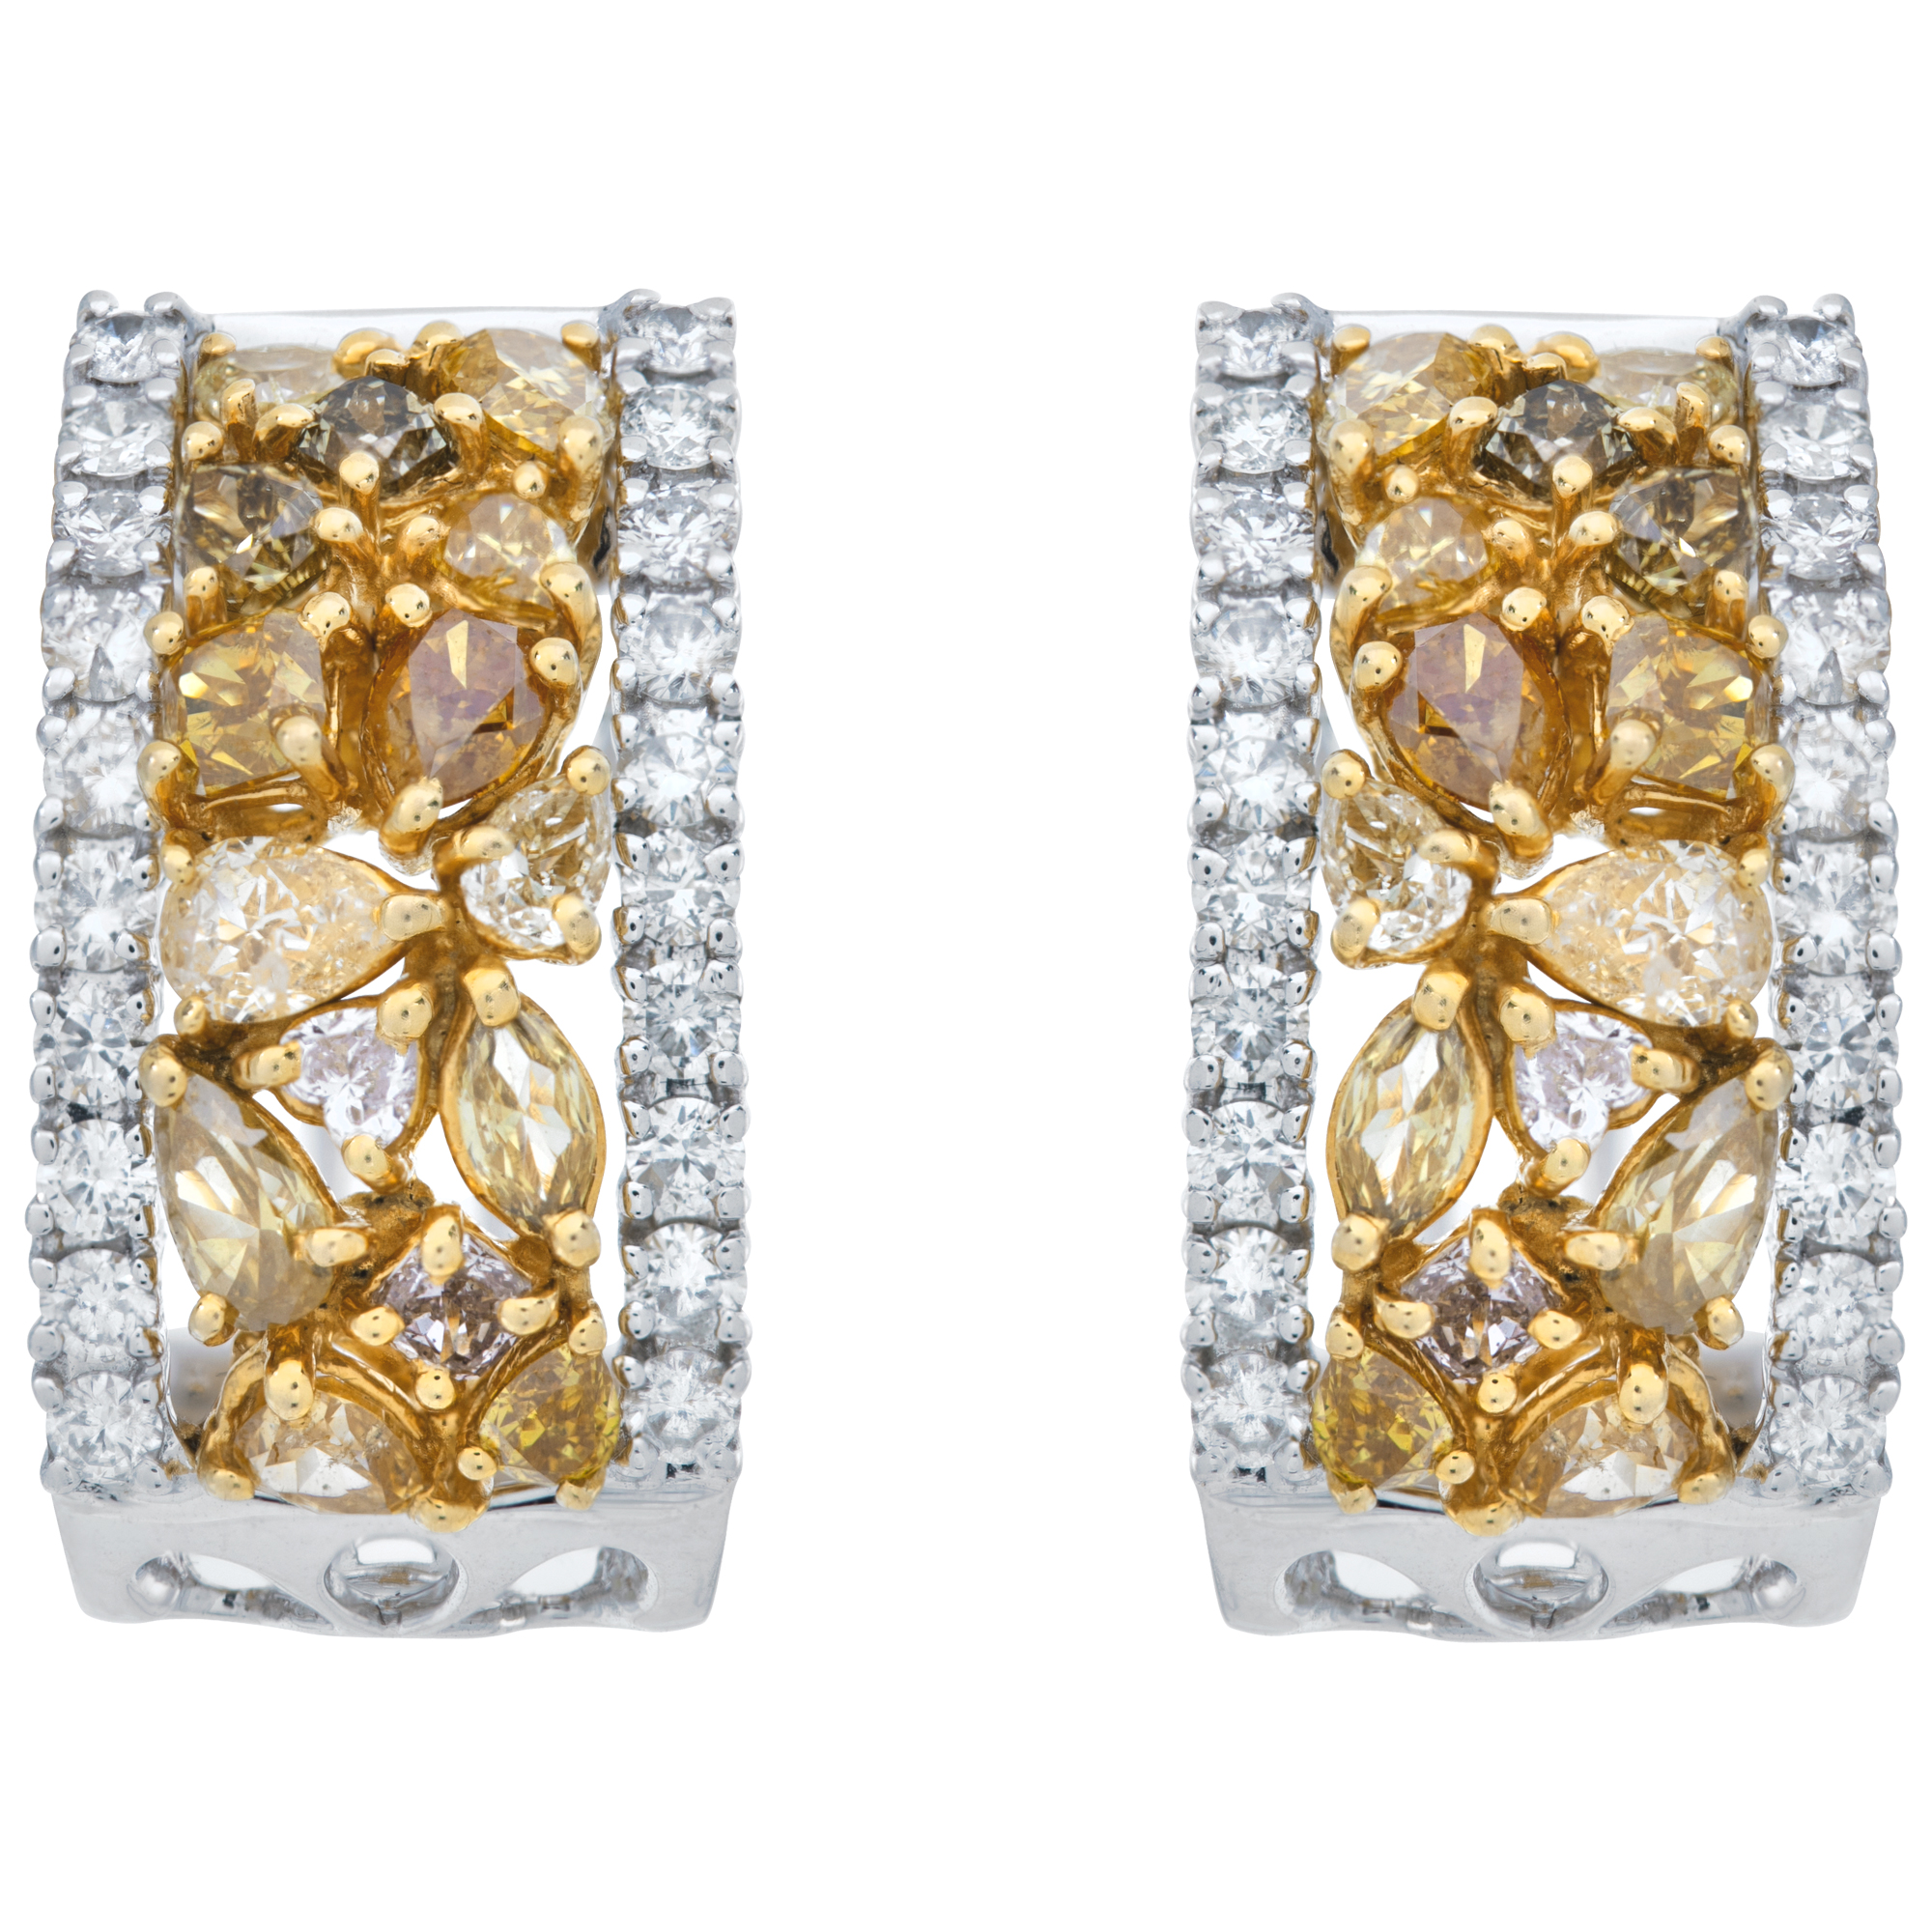 18k white & yellow gold 'huggies' earrings with 3.44 cts in Fancy Yellow Diamonds